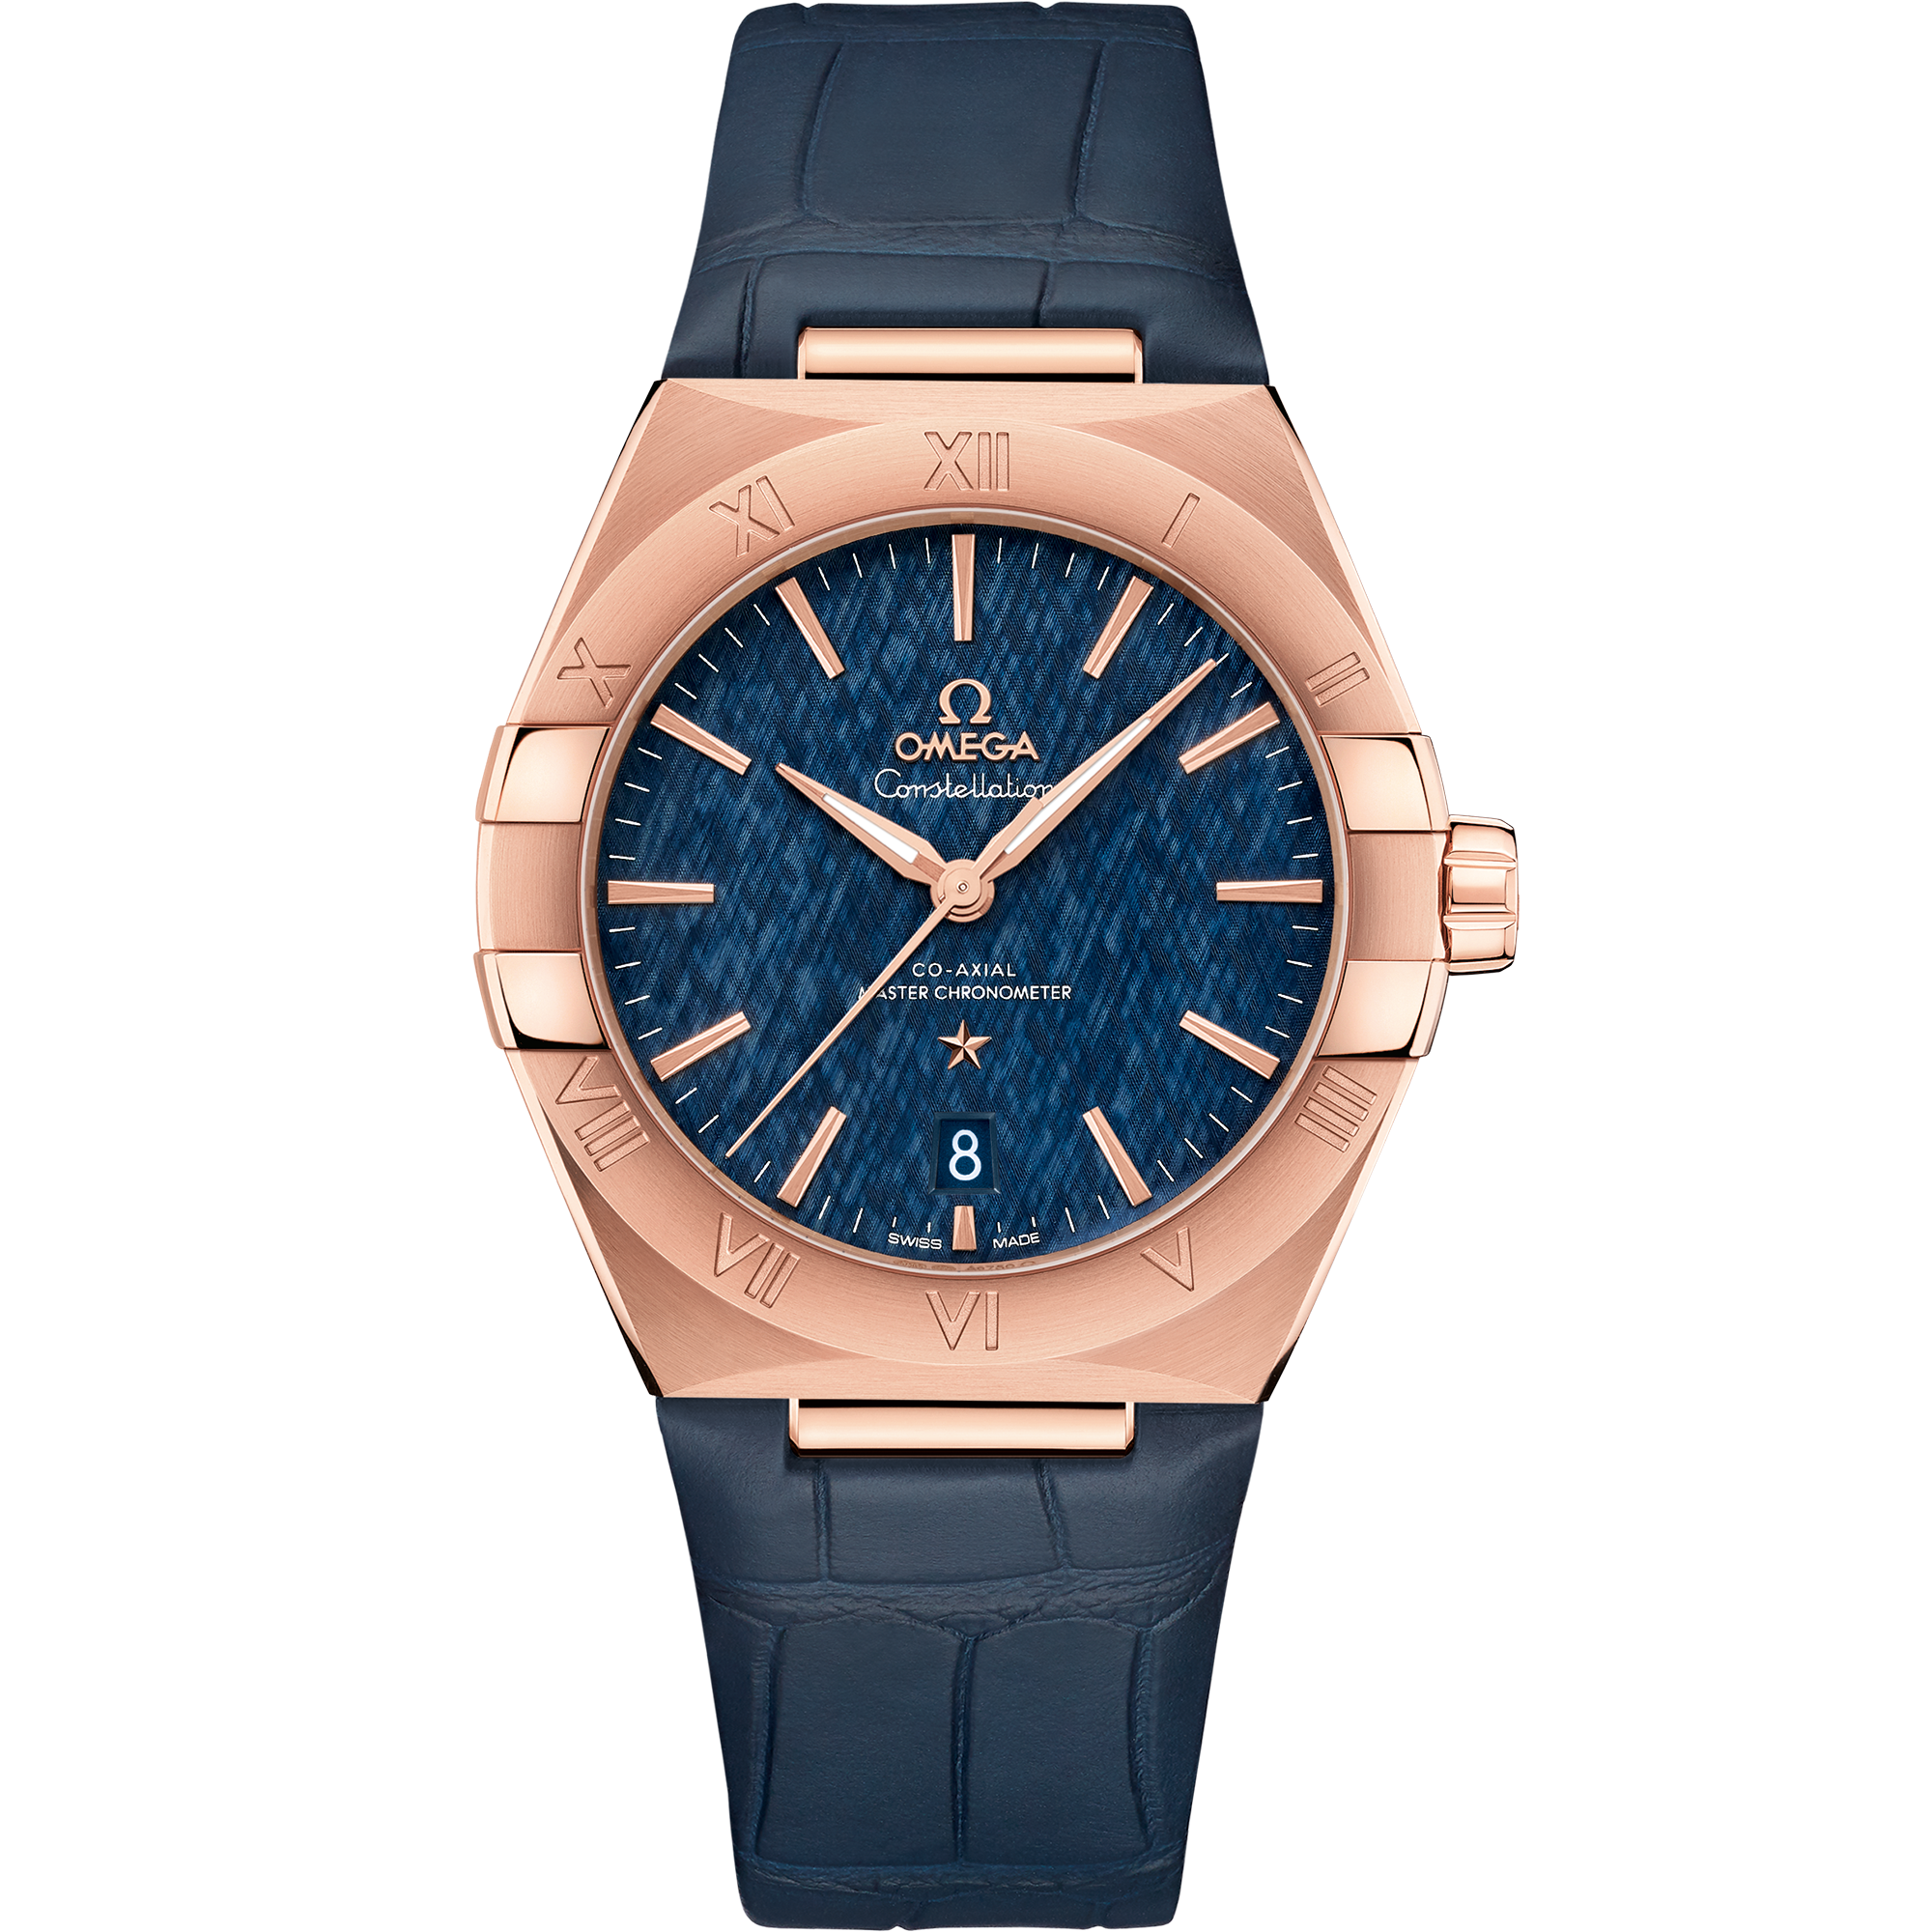 Blue dial watch on Sedna™ gold case with Leather strap - Constellation 39 mm, Sedna™ gold on leather strap - 131.53.39.20.03.001